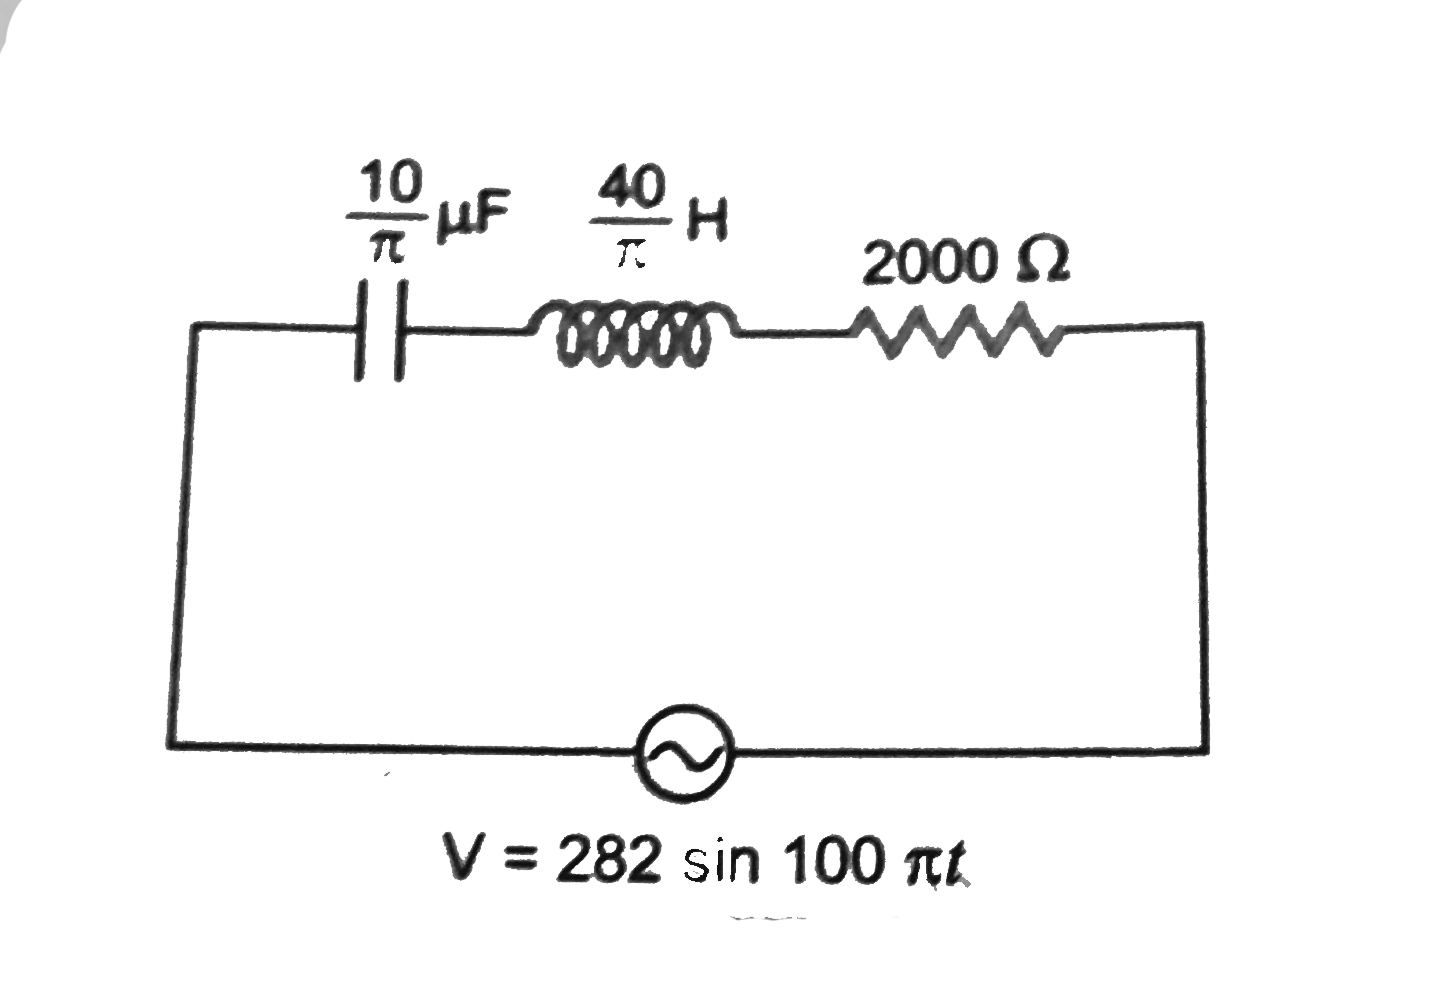 Equation of emf of a generator is V = 282 sin 100 pi t volt. Internal resistance of generator is 2000 Omega. It is connected as shown in Fig. Find the frequency of generator and impedance of circuit.